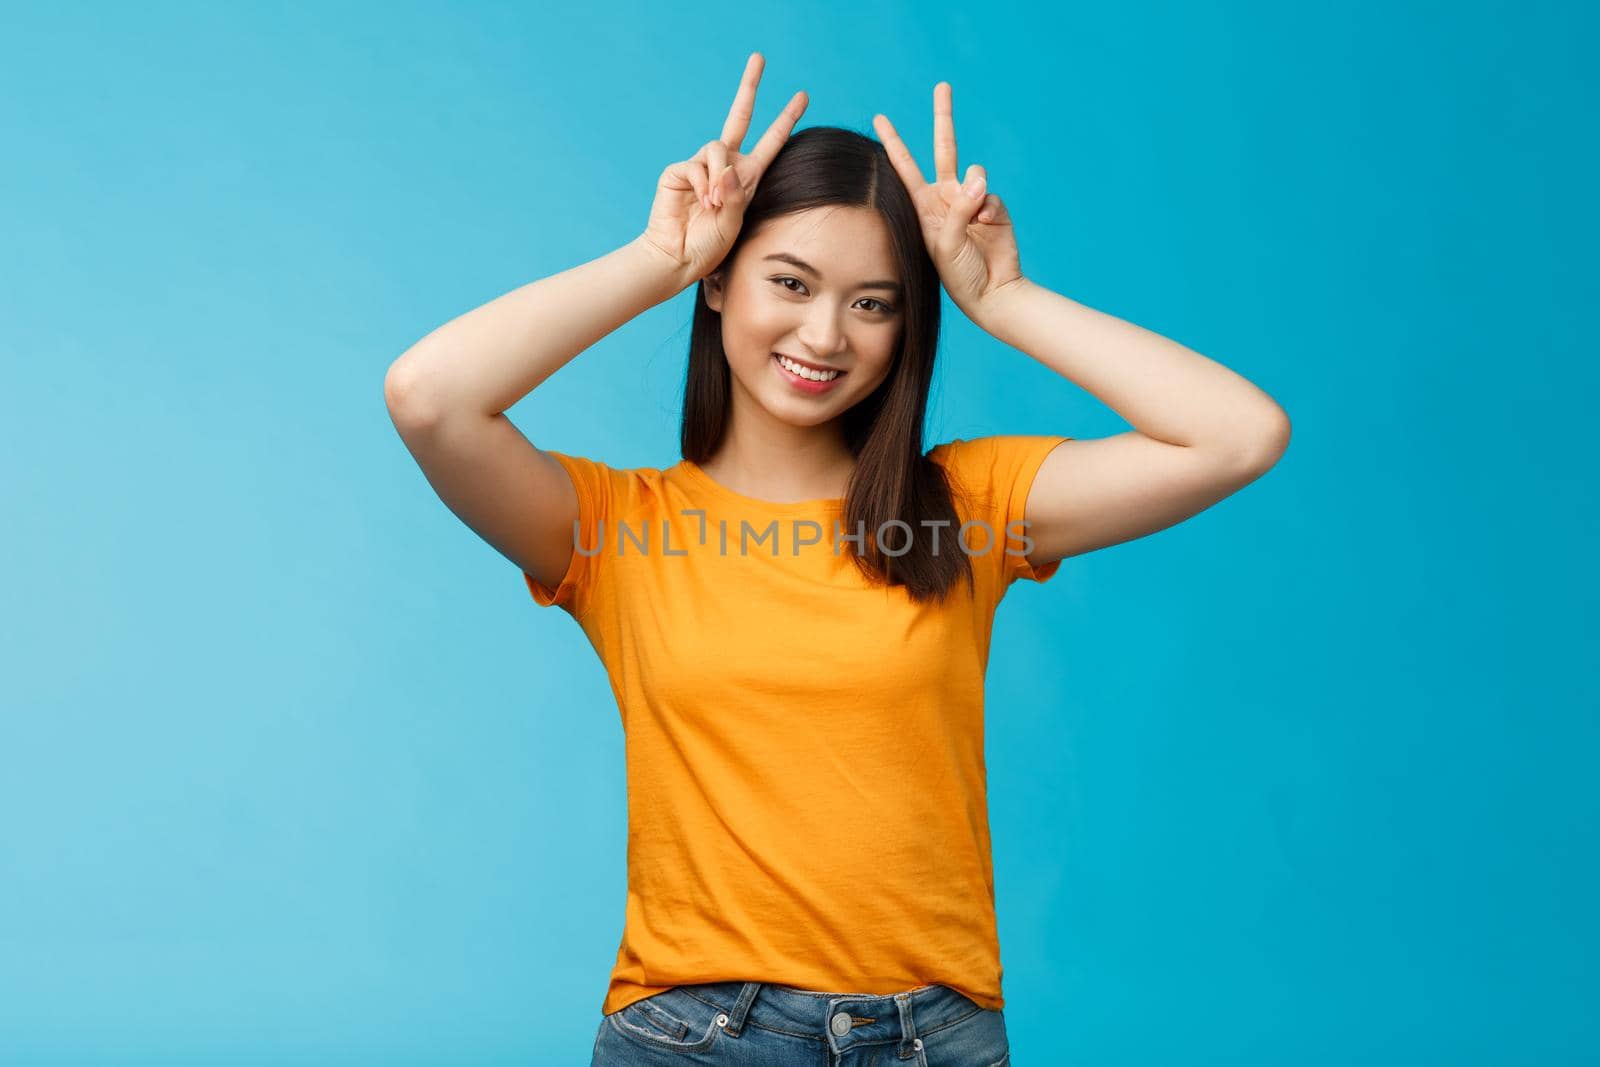 Cute tender asian girlfriend act silly lovely smile, tilt head show playfully ears hold peace victory signs on head, grinning toothy, express joy happiness and delight, stand blue background.